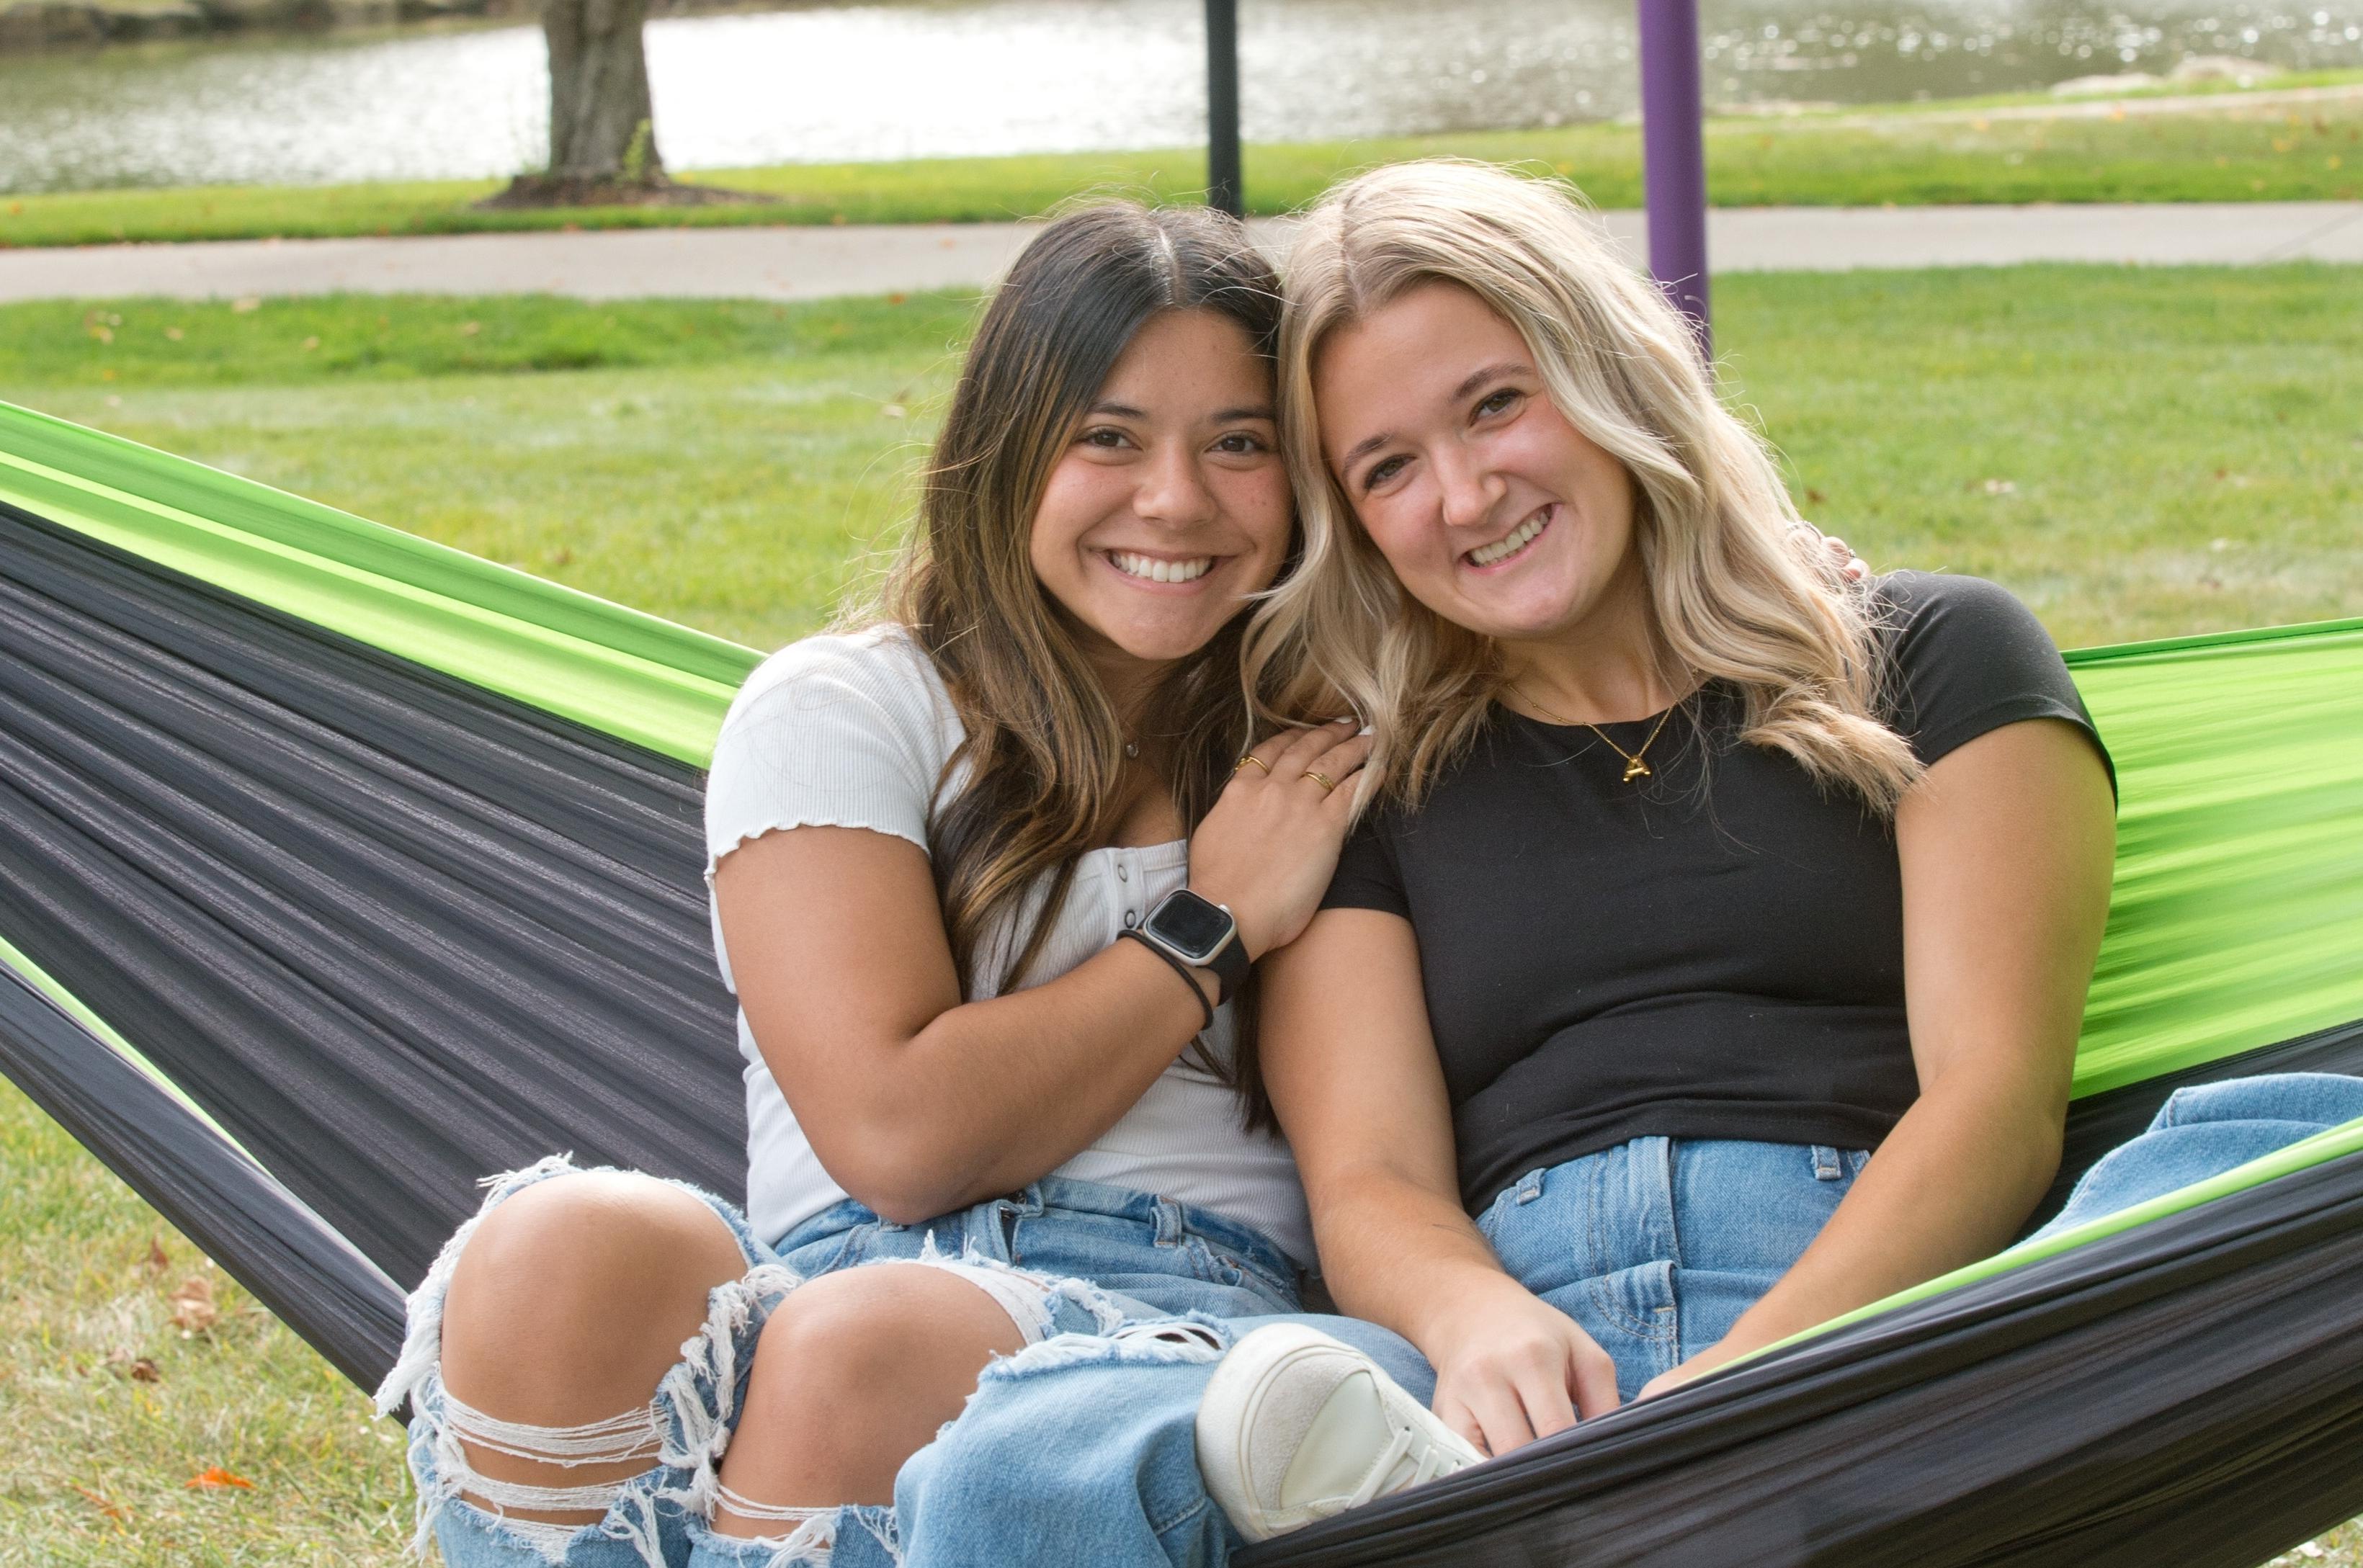 Mount 联盟 students smiling on a hammock by 的 lakes.